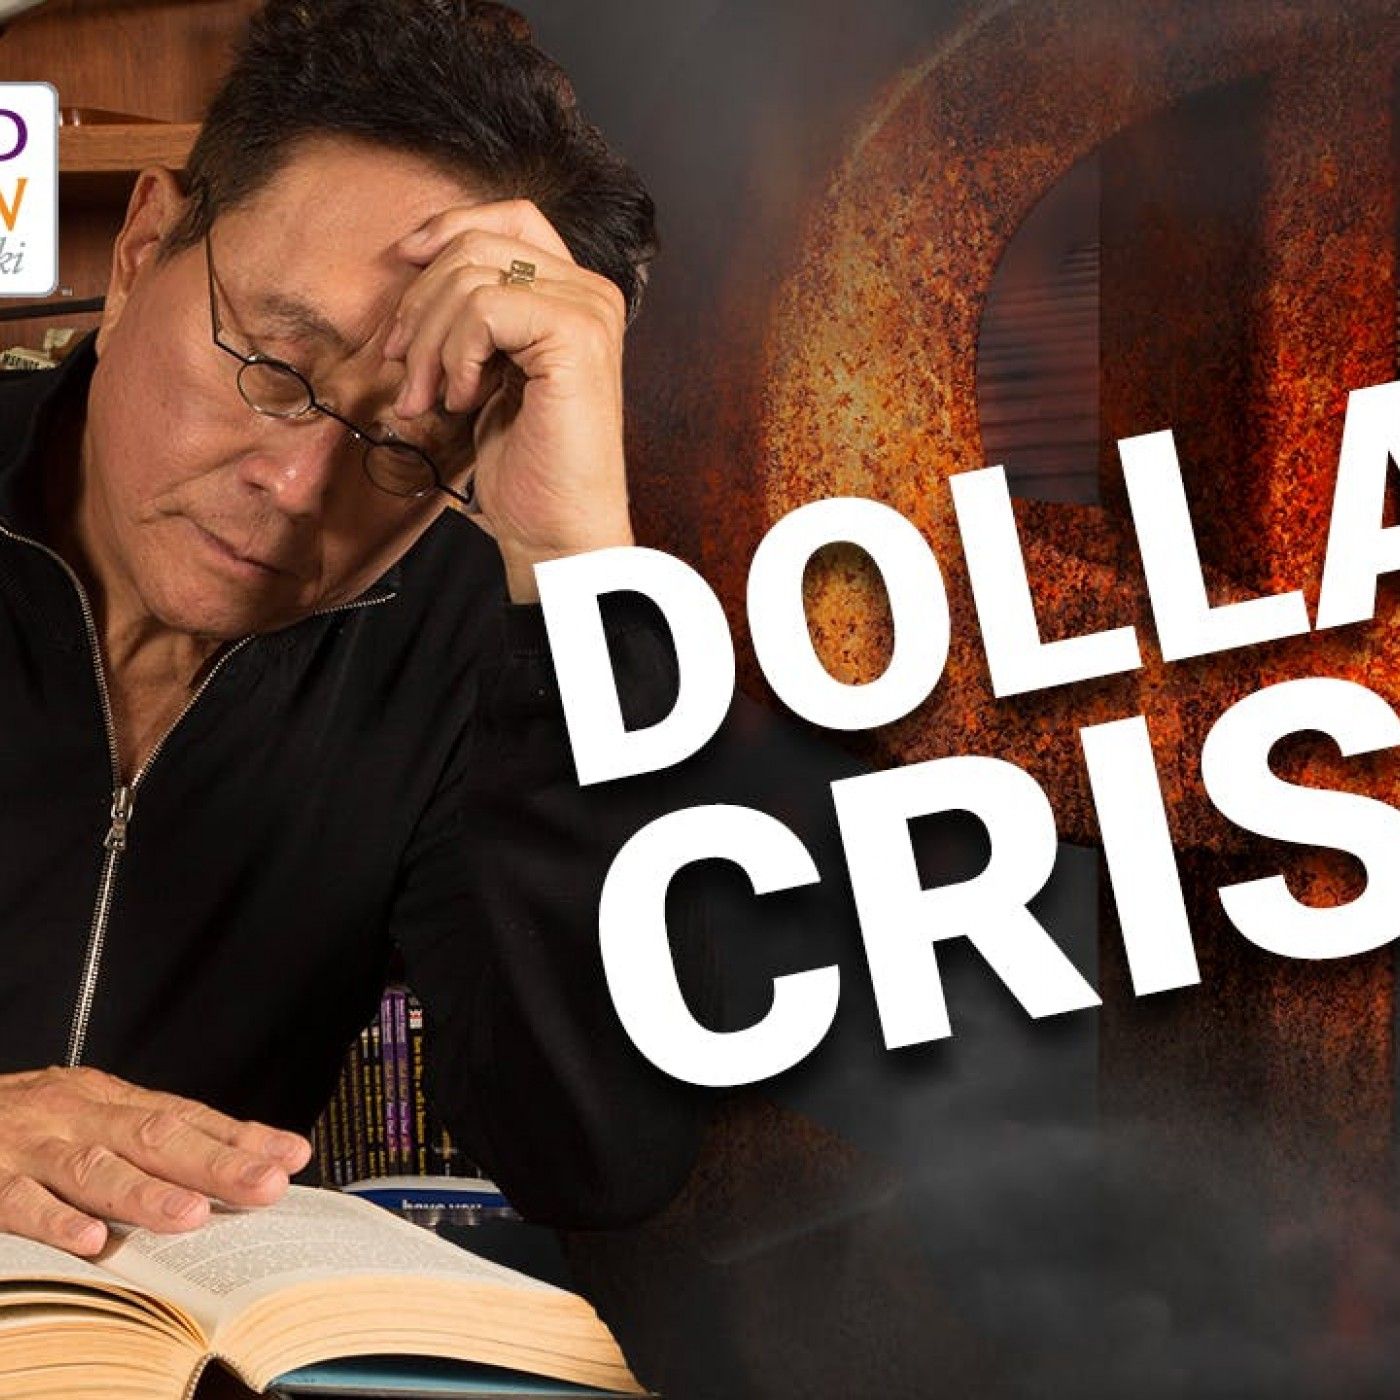 FIND OUT HOW THE CHINA TRADE WAR COULD SCUTTLE THE ECONOMY – Robert Kiyosaki featuring Richard Duncan